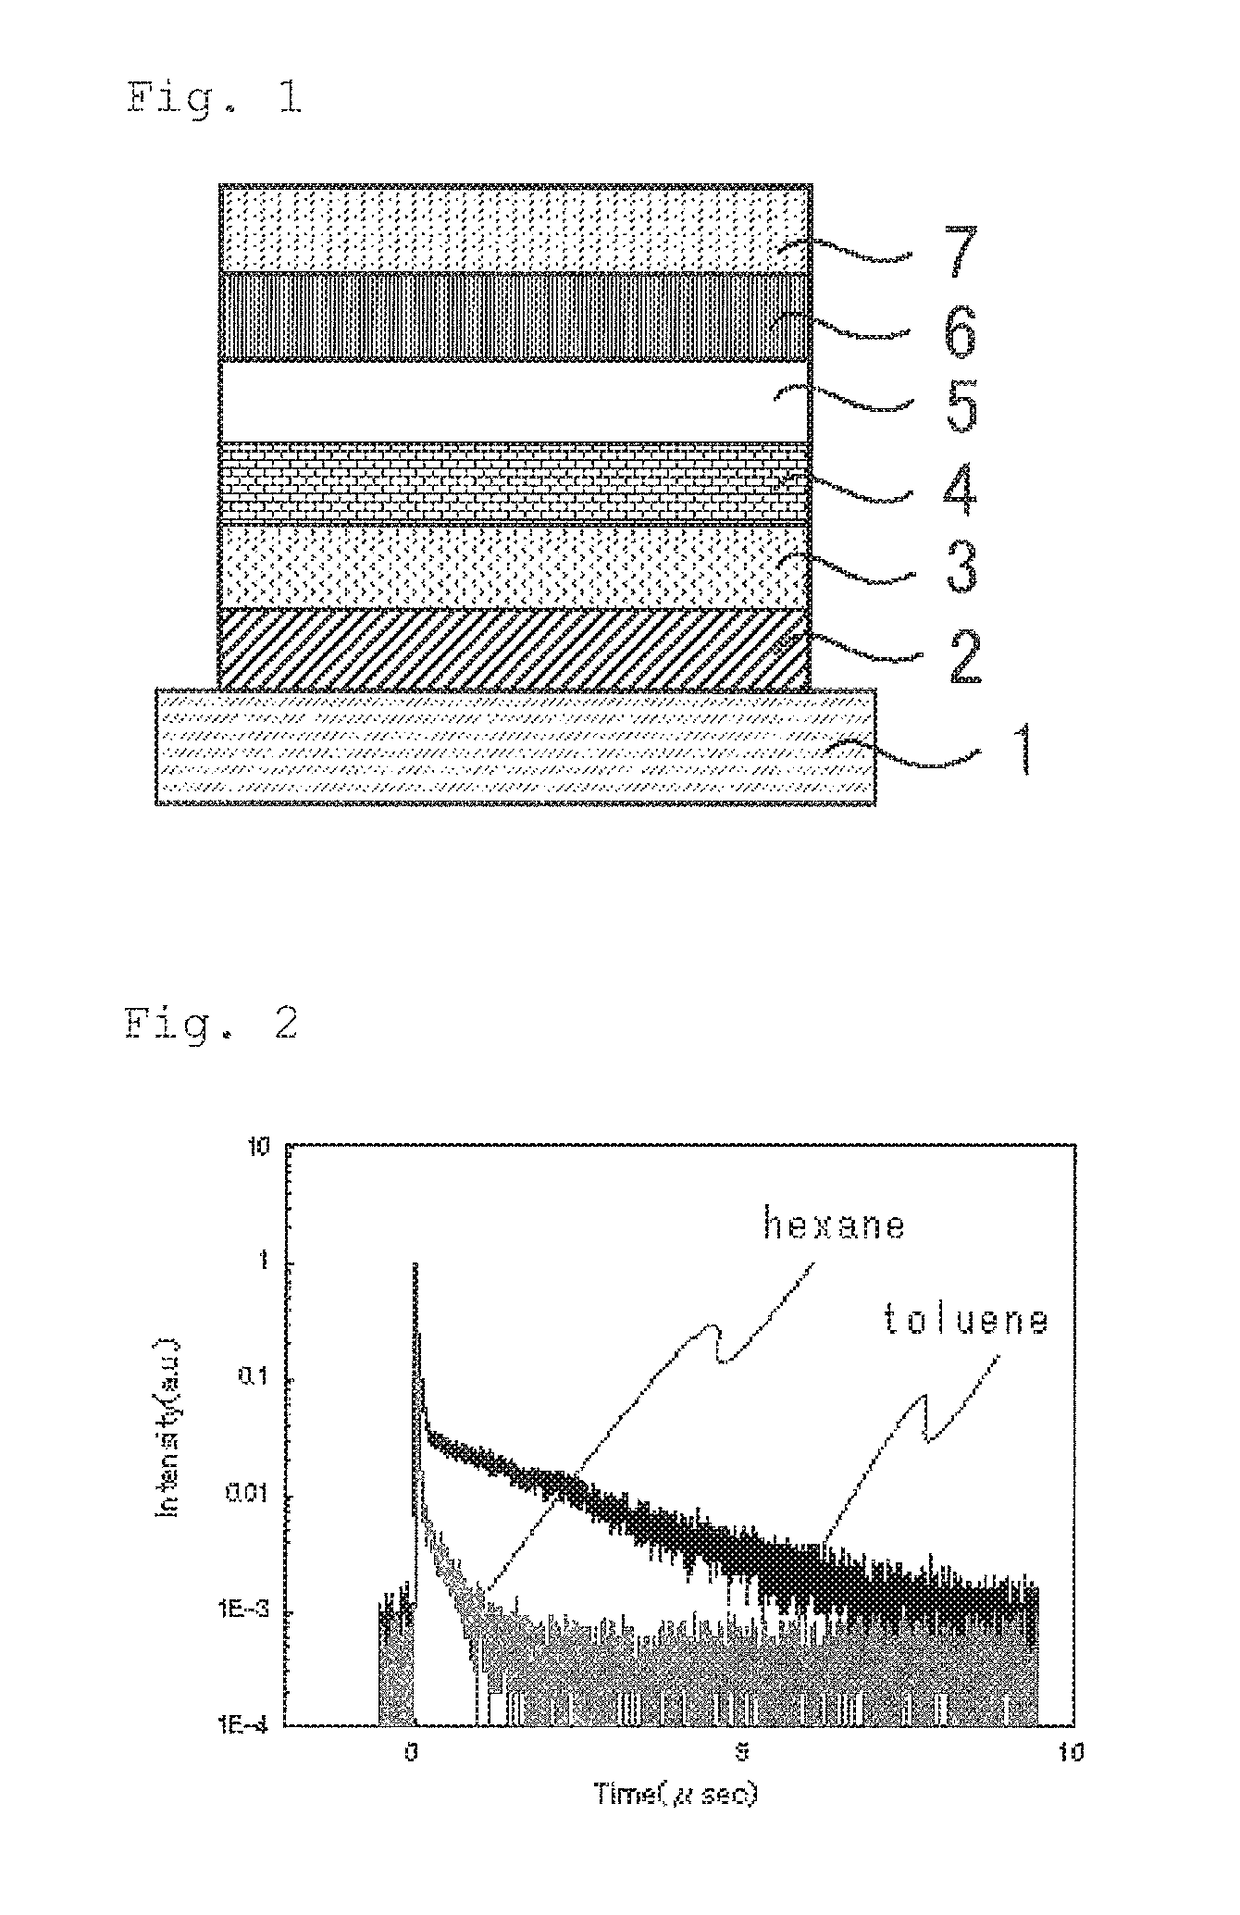 Light emitting material, delayed fluorescent emitter, organic light emitting device, and compound